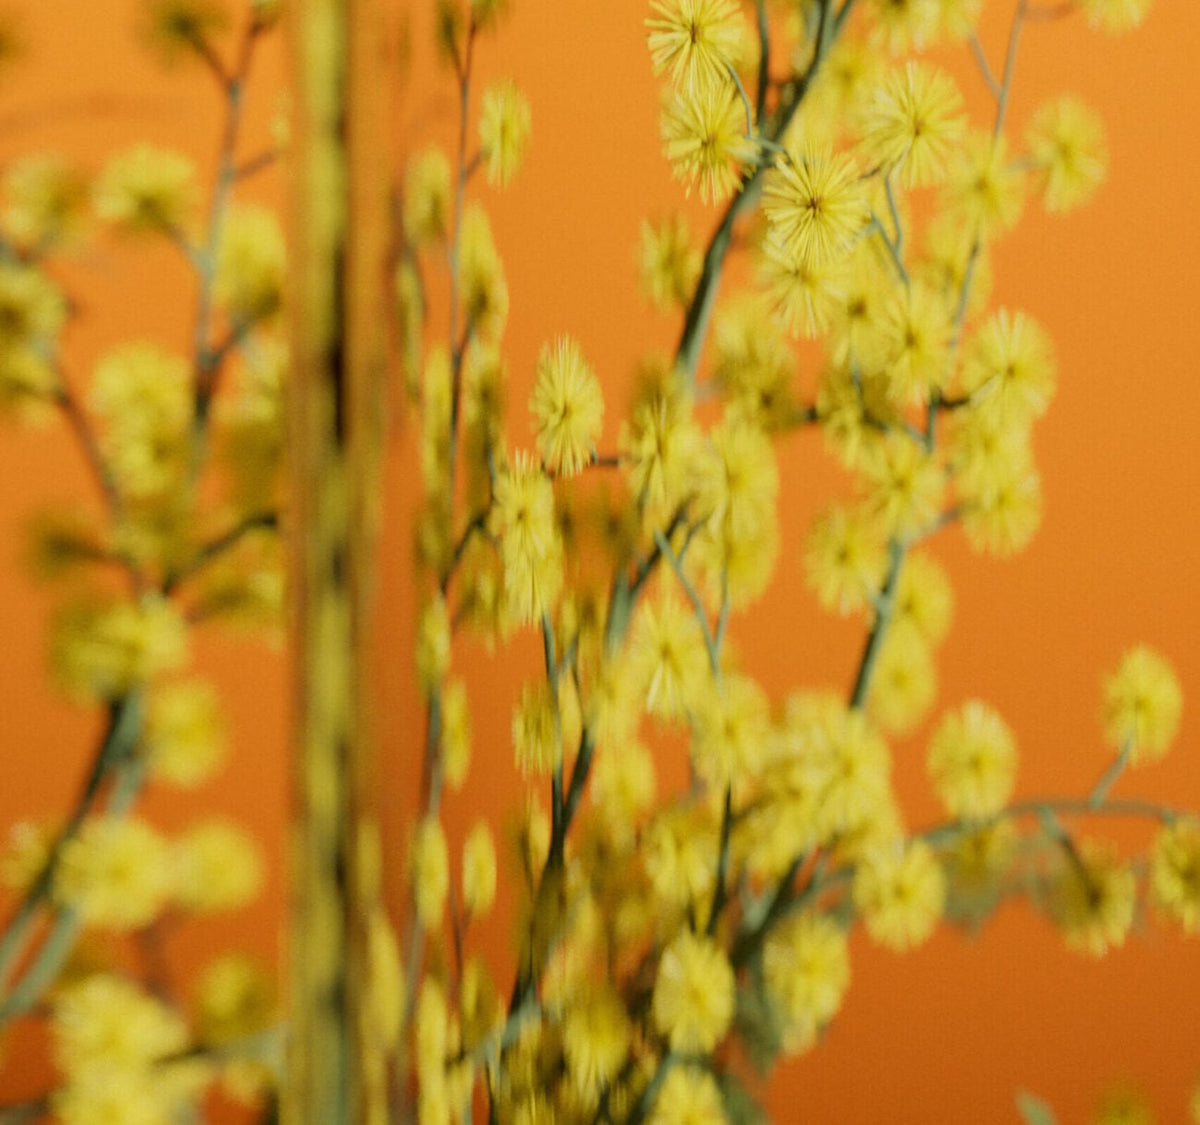 Yellow flowers in a vase bring Abel Pause and restorative vibes.